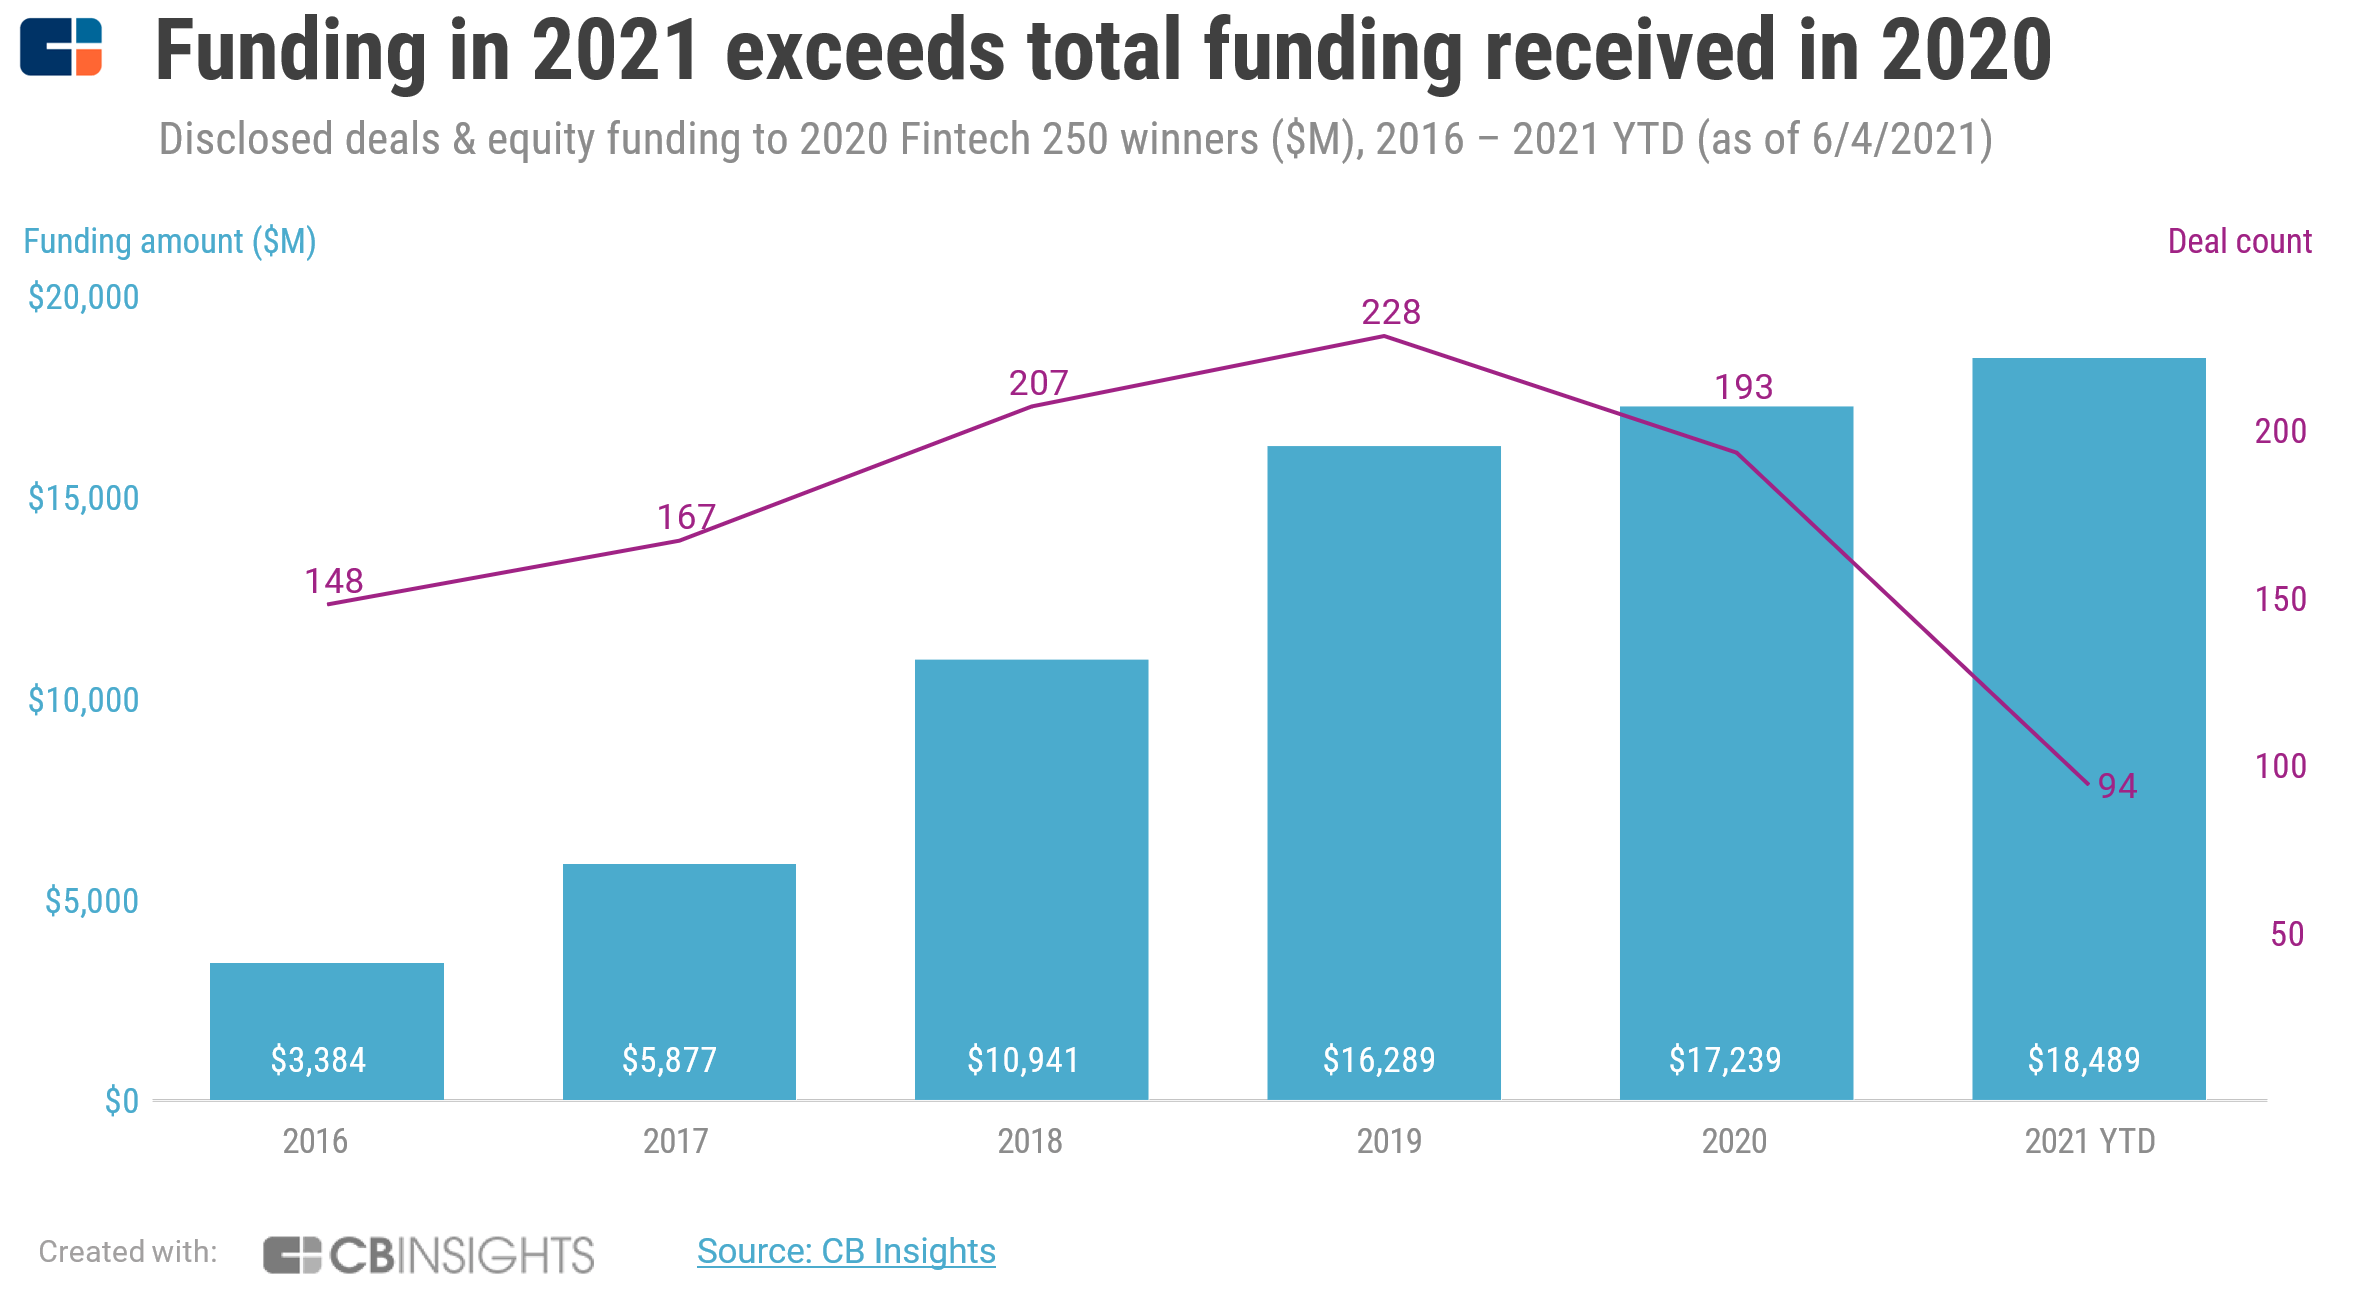 Funding to Fintech 250 companies in 2021 has already exceeded last year's totals